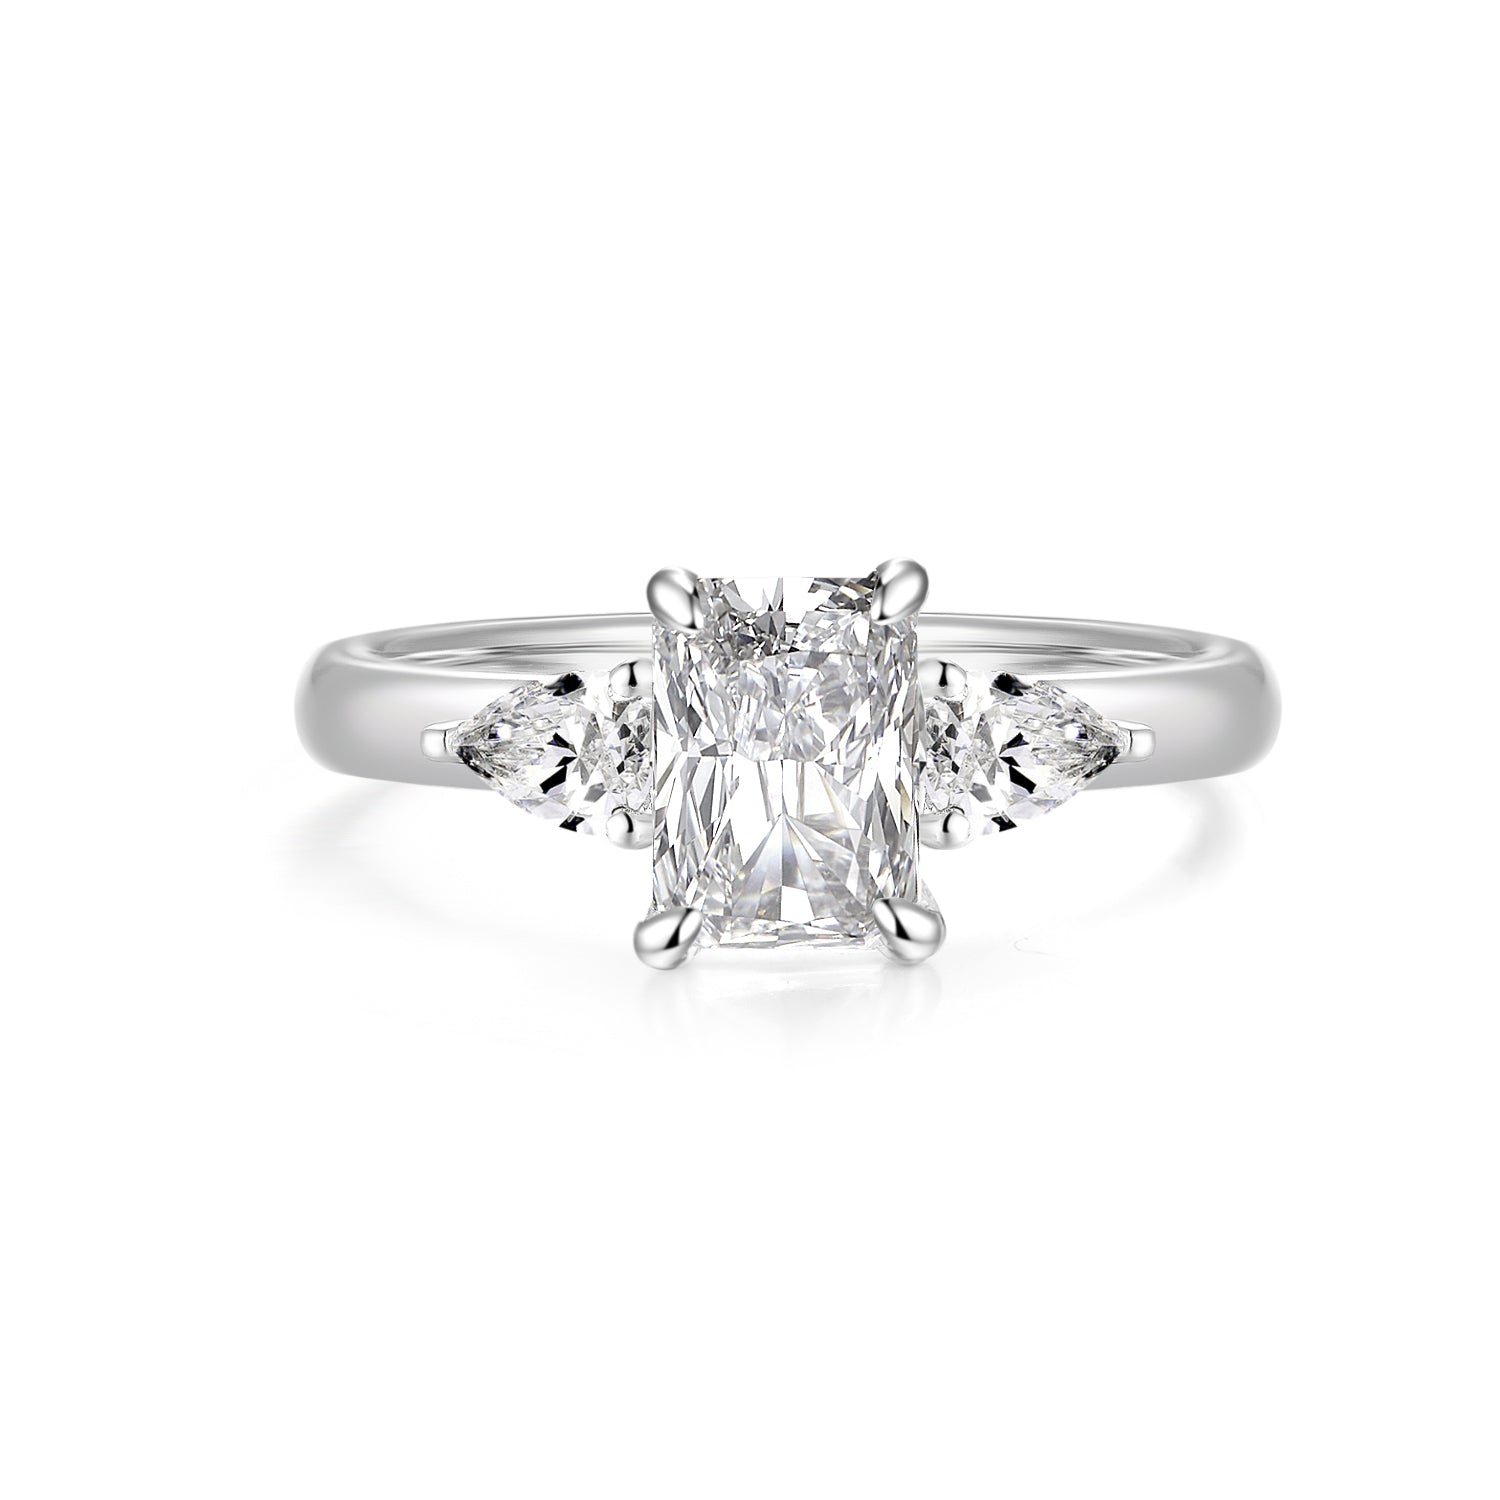 Marianne | 1ct Radiant cut Trilogy Engagement Ring